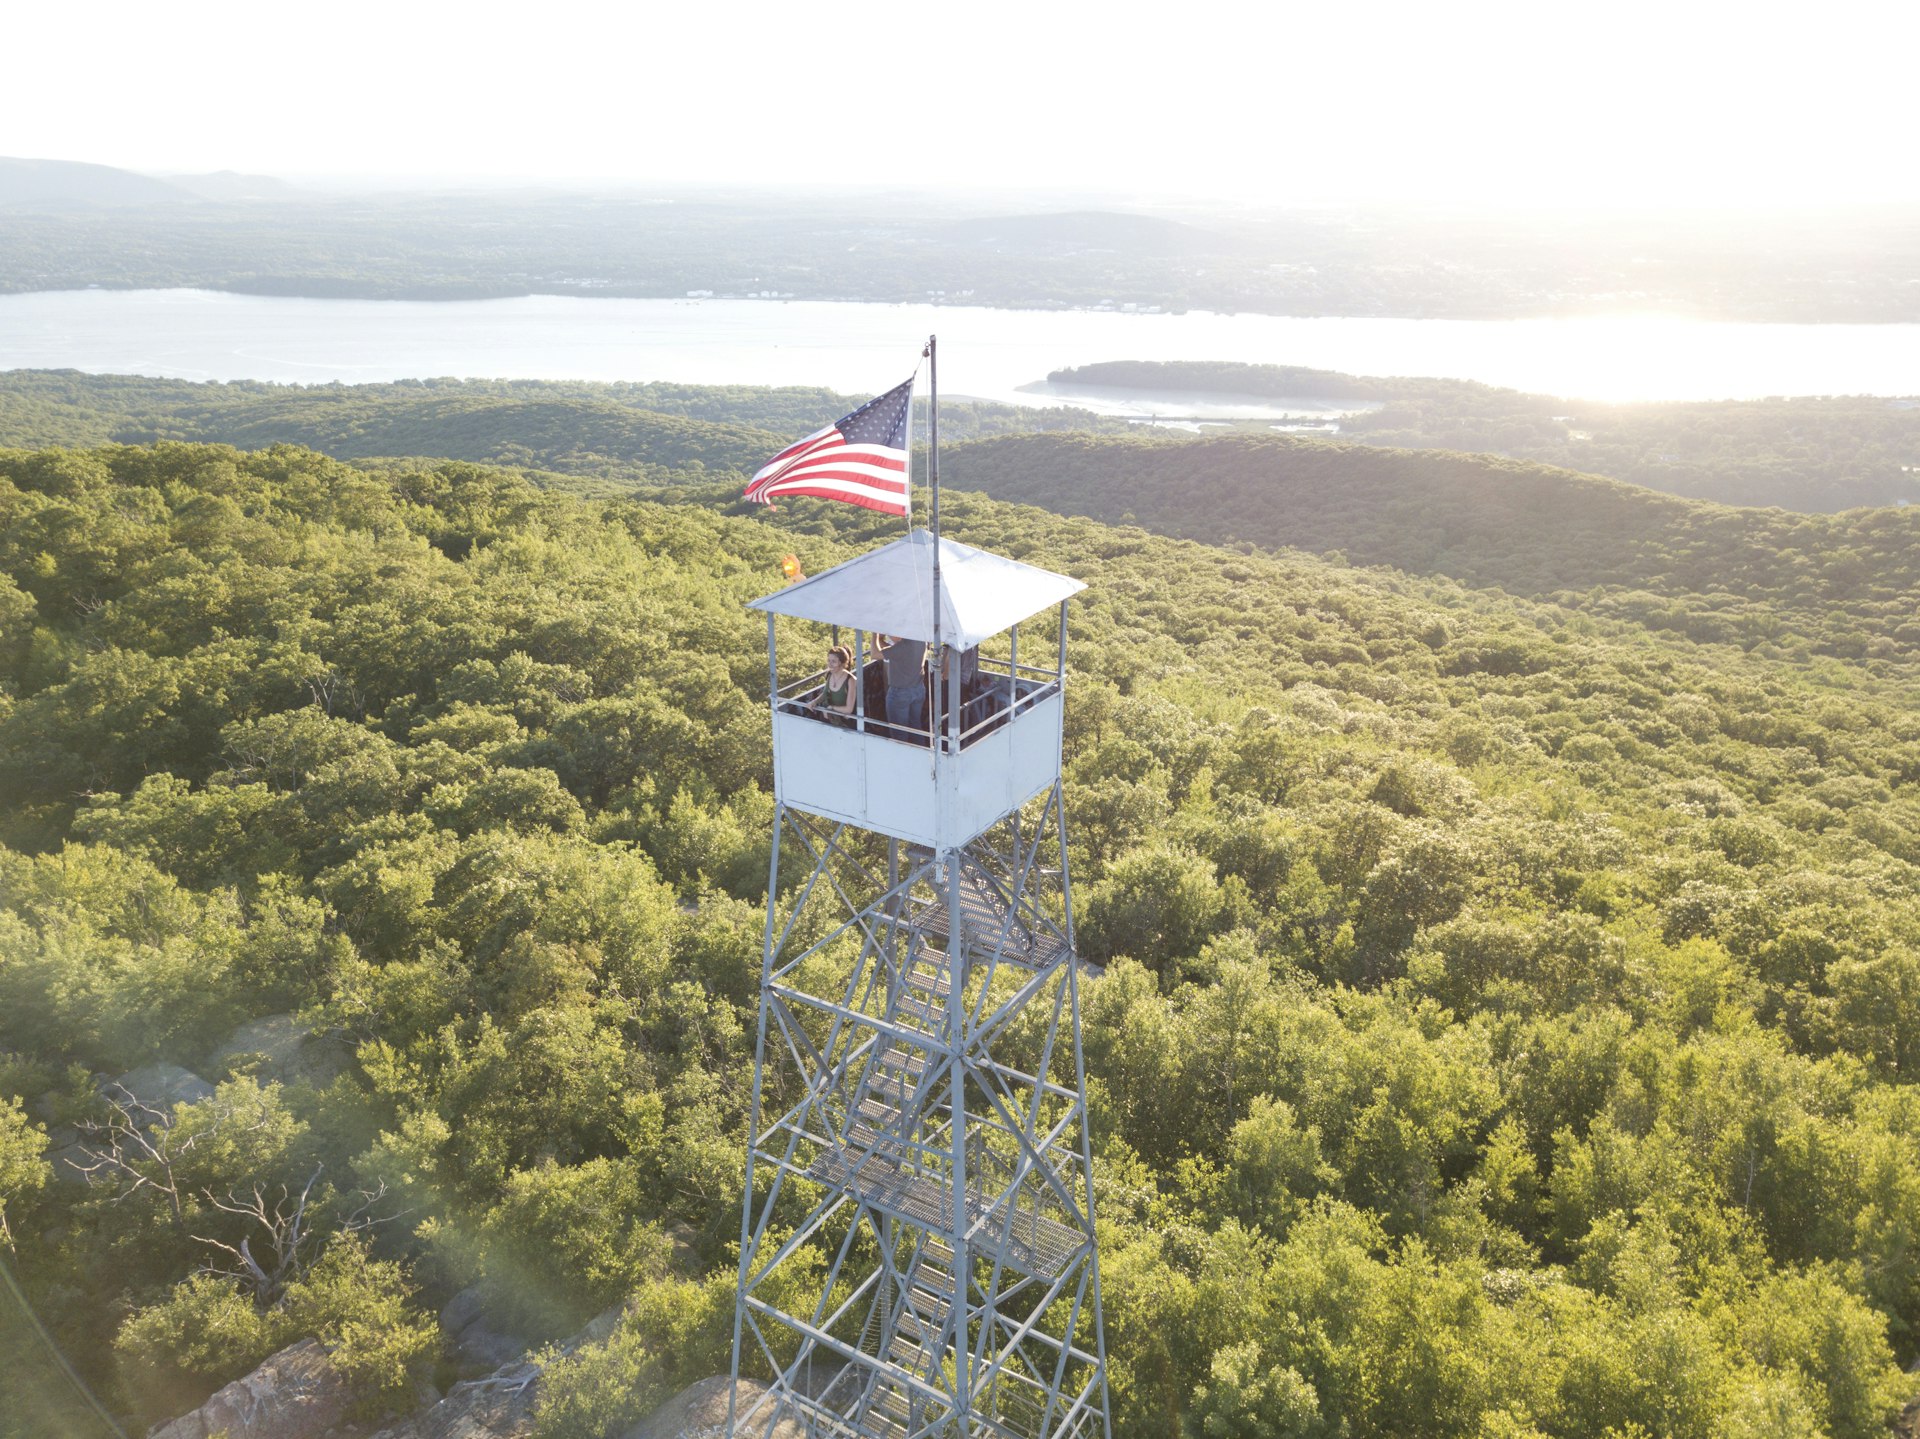 A woman in a tower with an American flag, looking out over the Hudson River, greenery and mountains